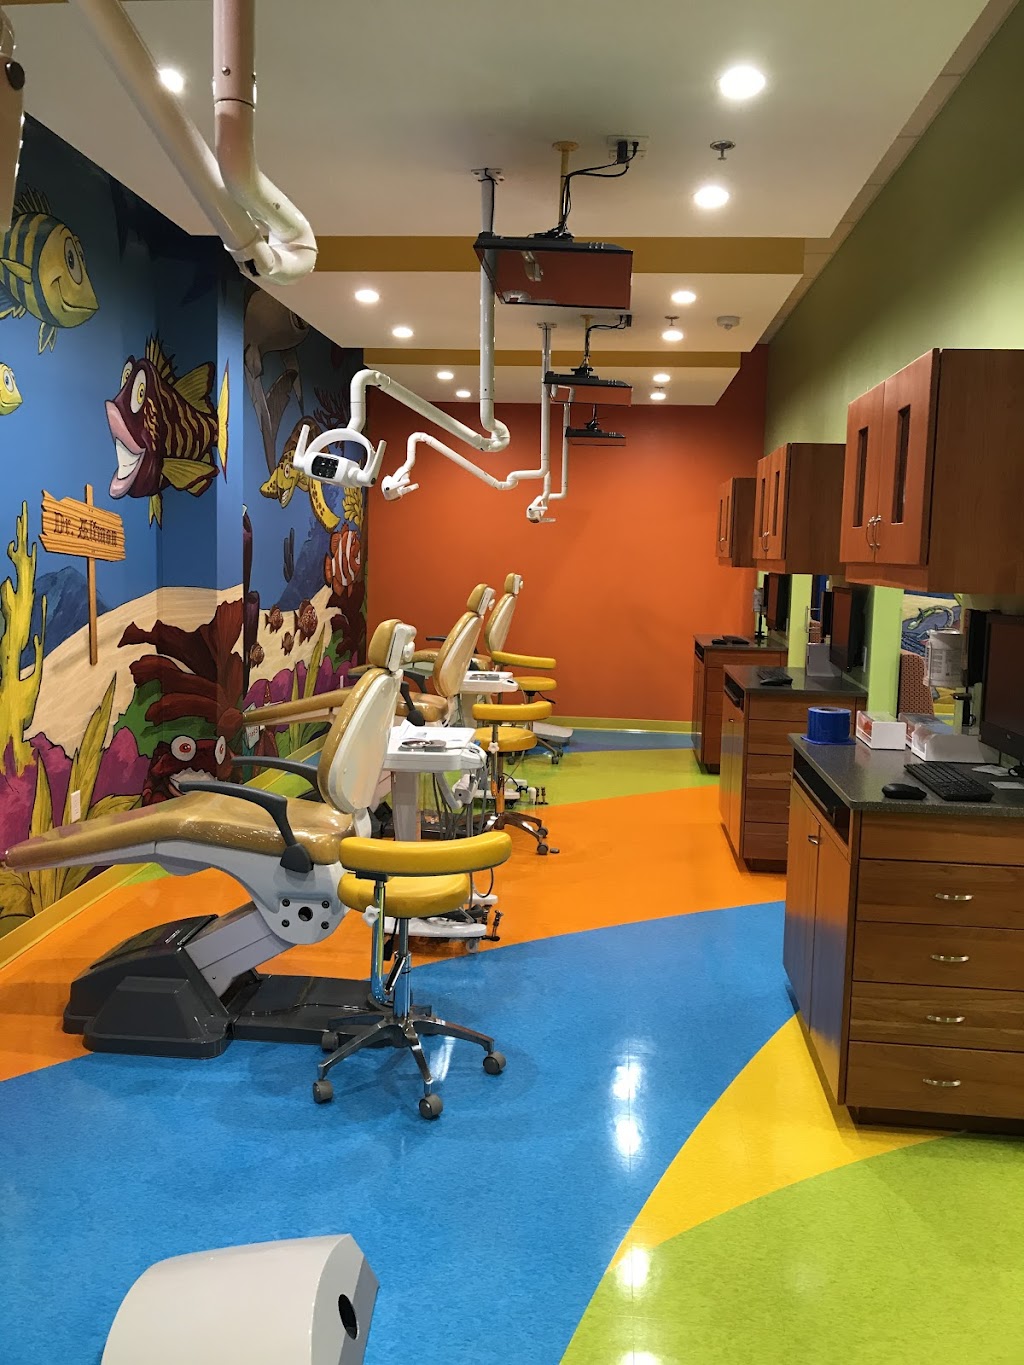 Kiddie Cavity Care | 3743 Branch Ave Suite A, Temple Hills, MD 20748, USA | Phone: (301) 355-0543